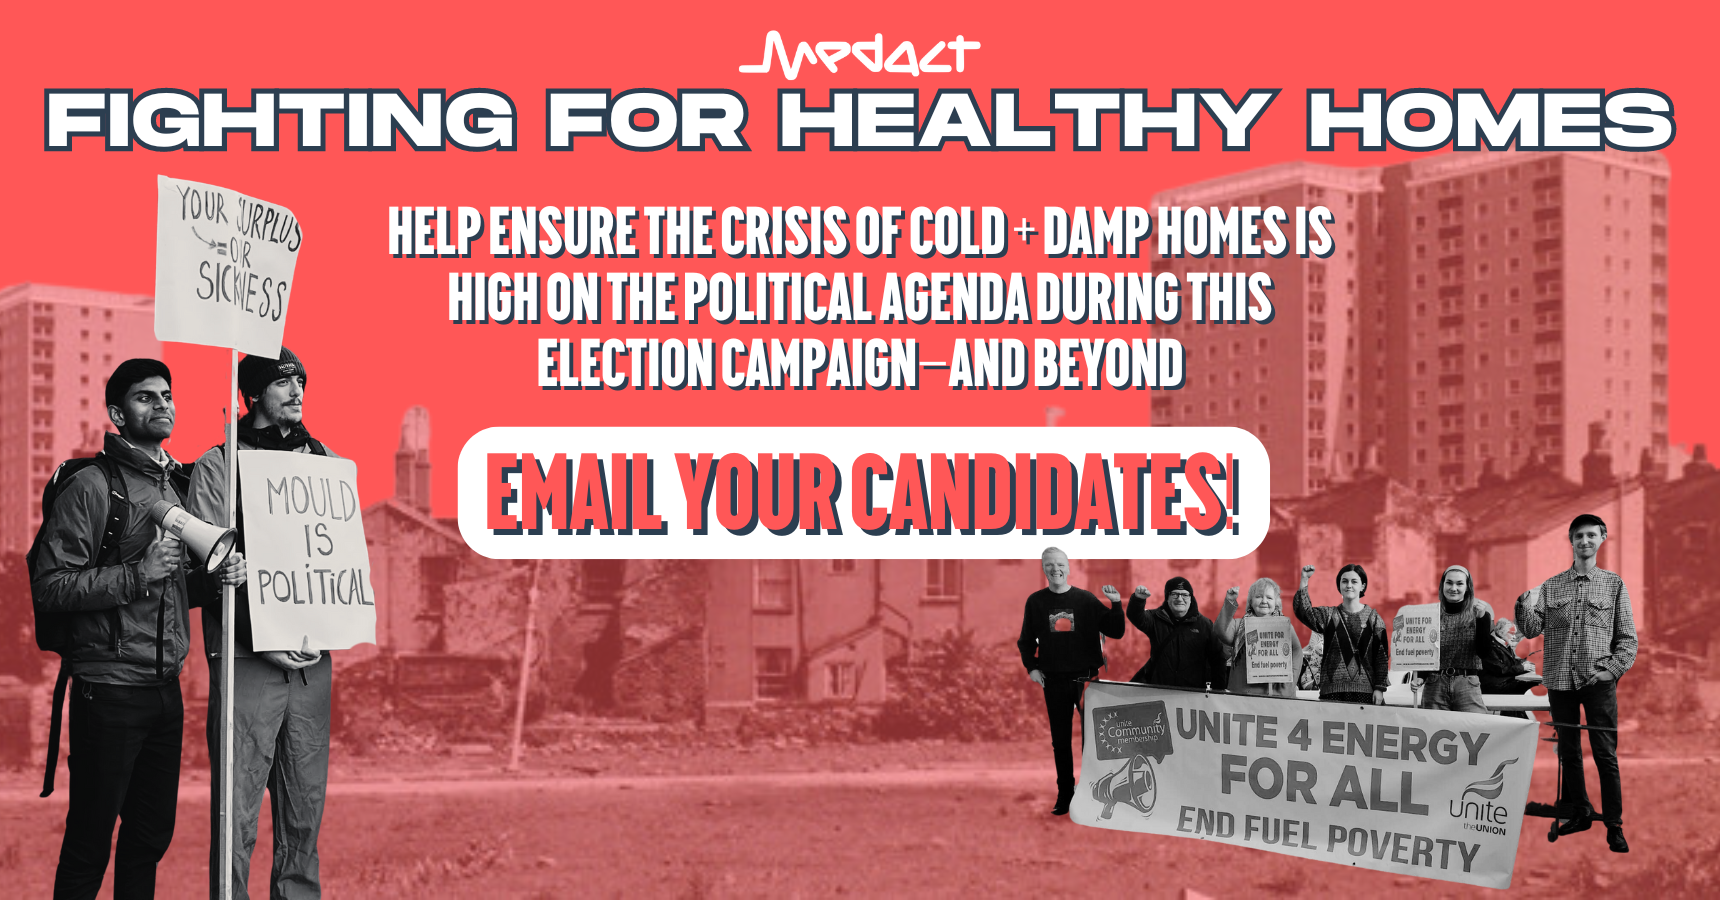 Demand Homes for Health! Write to your candidates